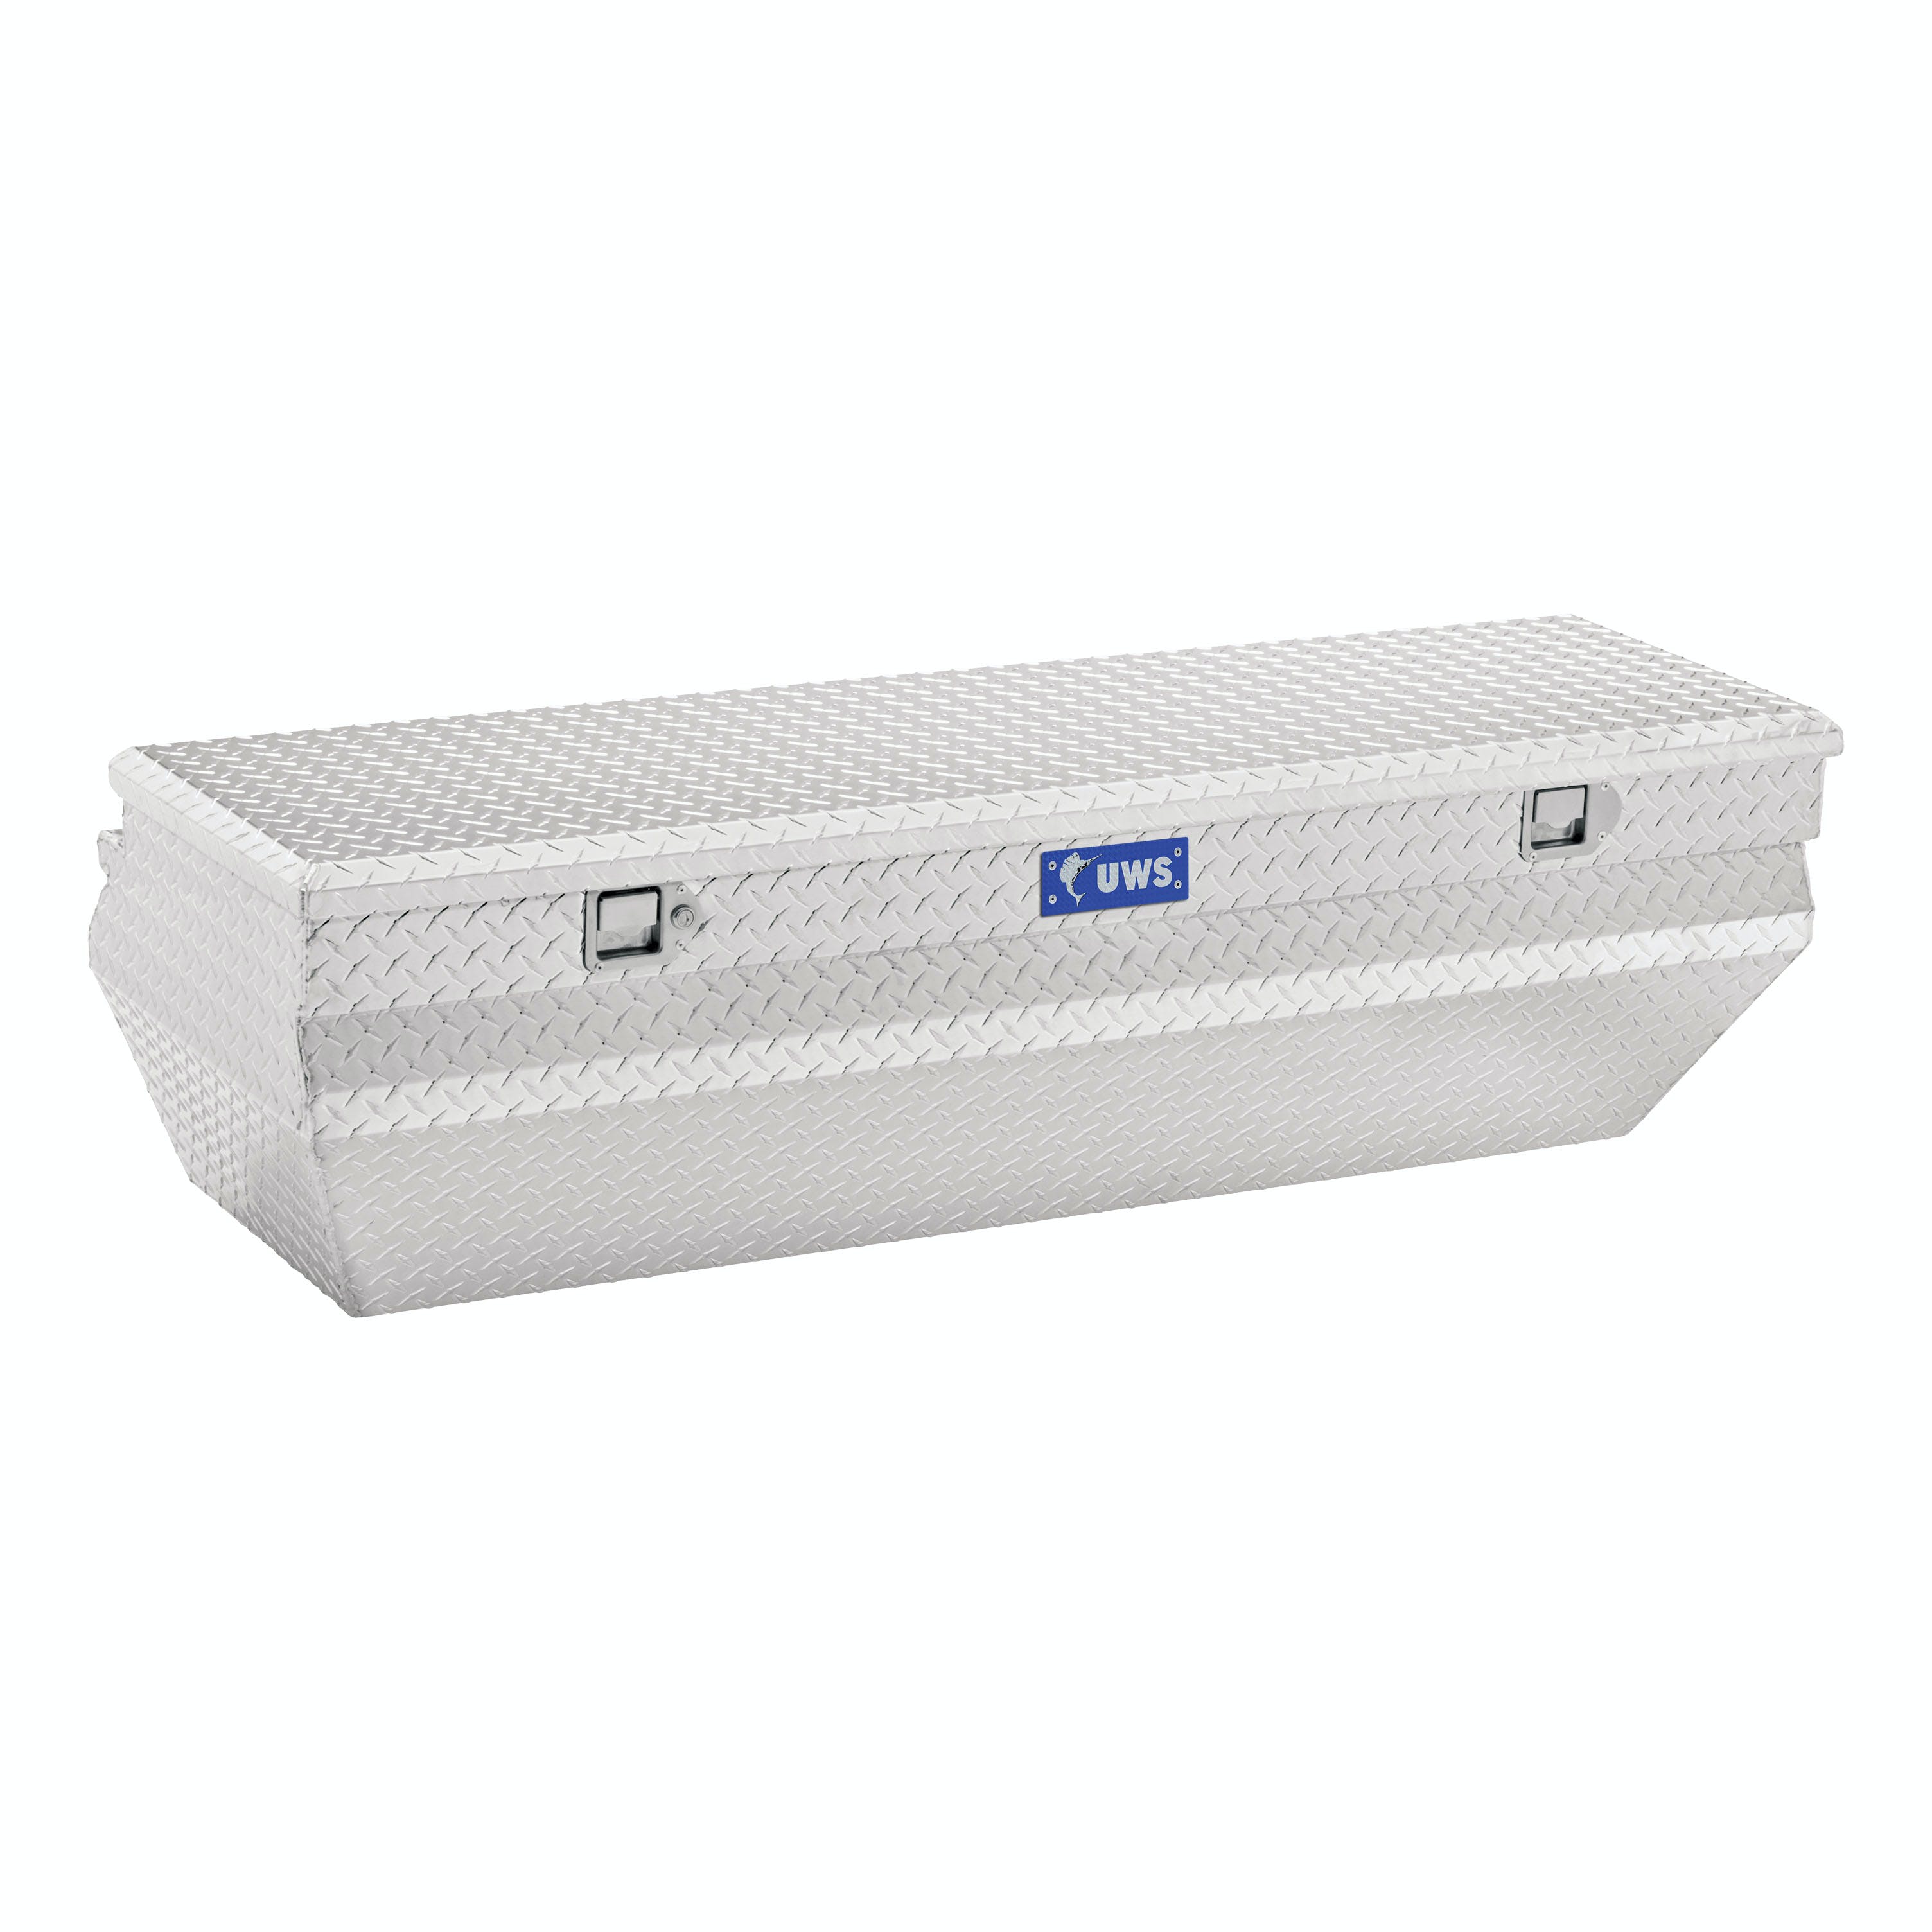 UWS TBC-62-WN 62 inch Aluminum Chest Box Wedge Notched